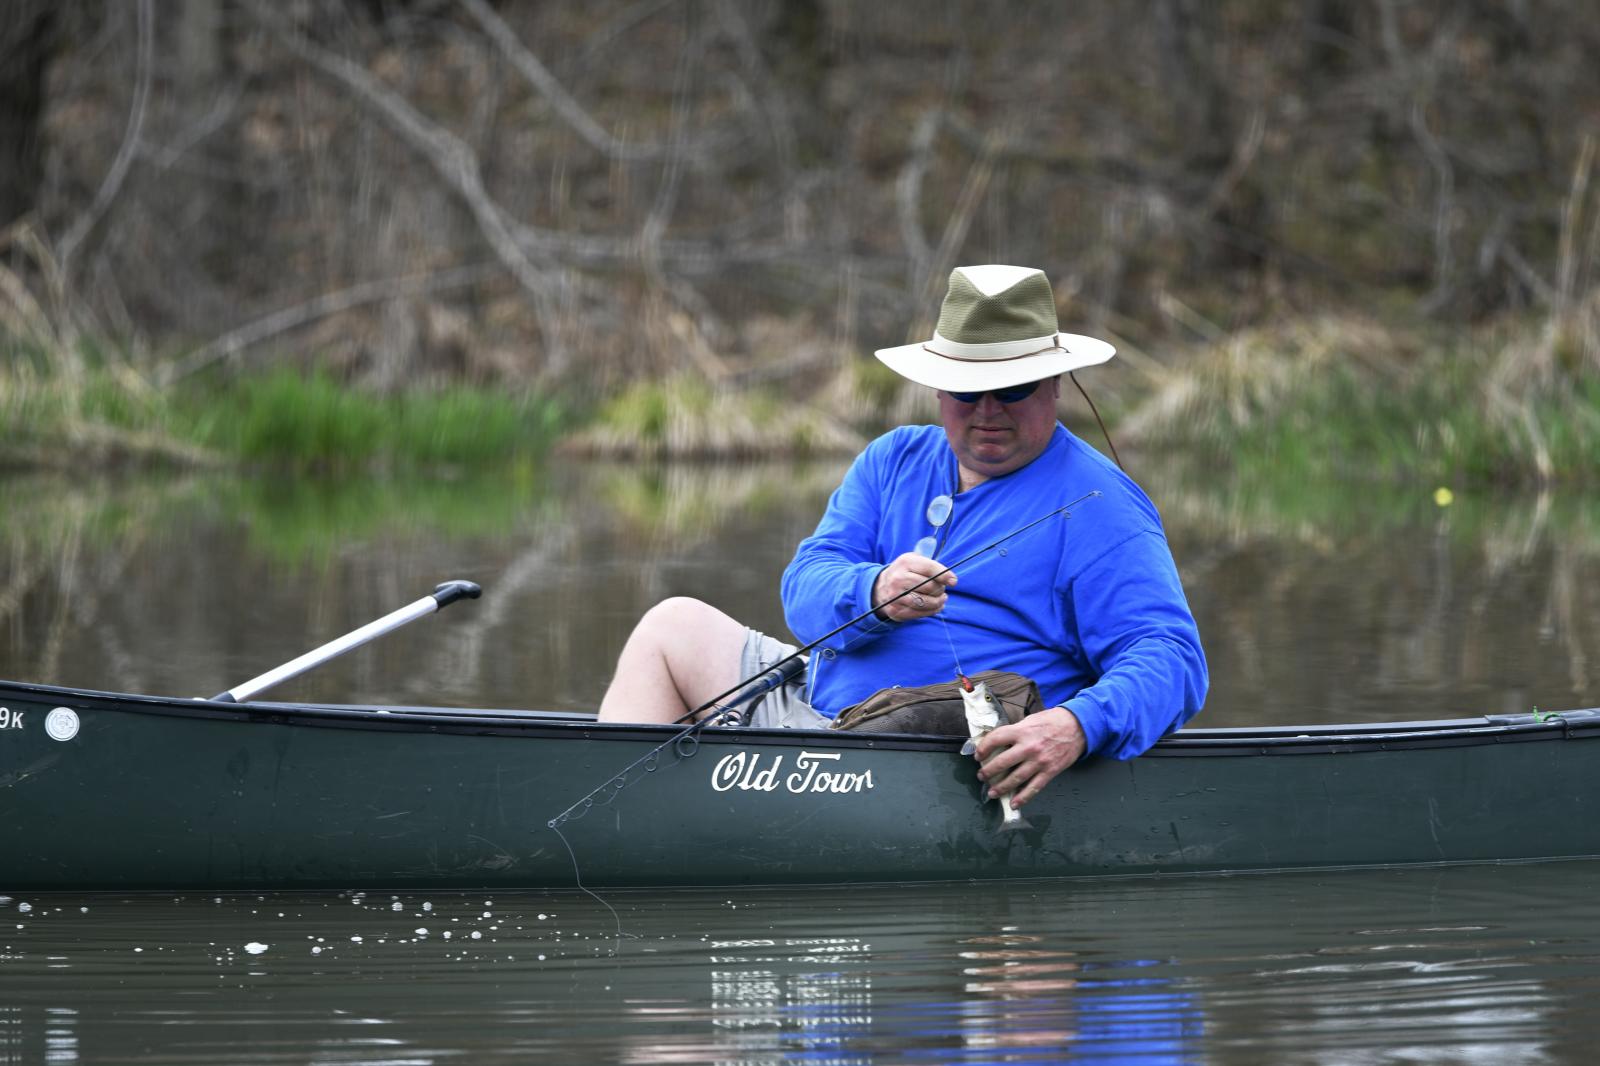 Nick fishes on March 27, 2020, at the Number 153 Reservoir in Boone County, Missouri. According to Nick, fishing was one of the easier activity to do during the COVID-19 pandemic since his boat allowed him to practice social distancing.